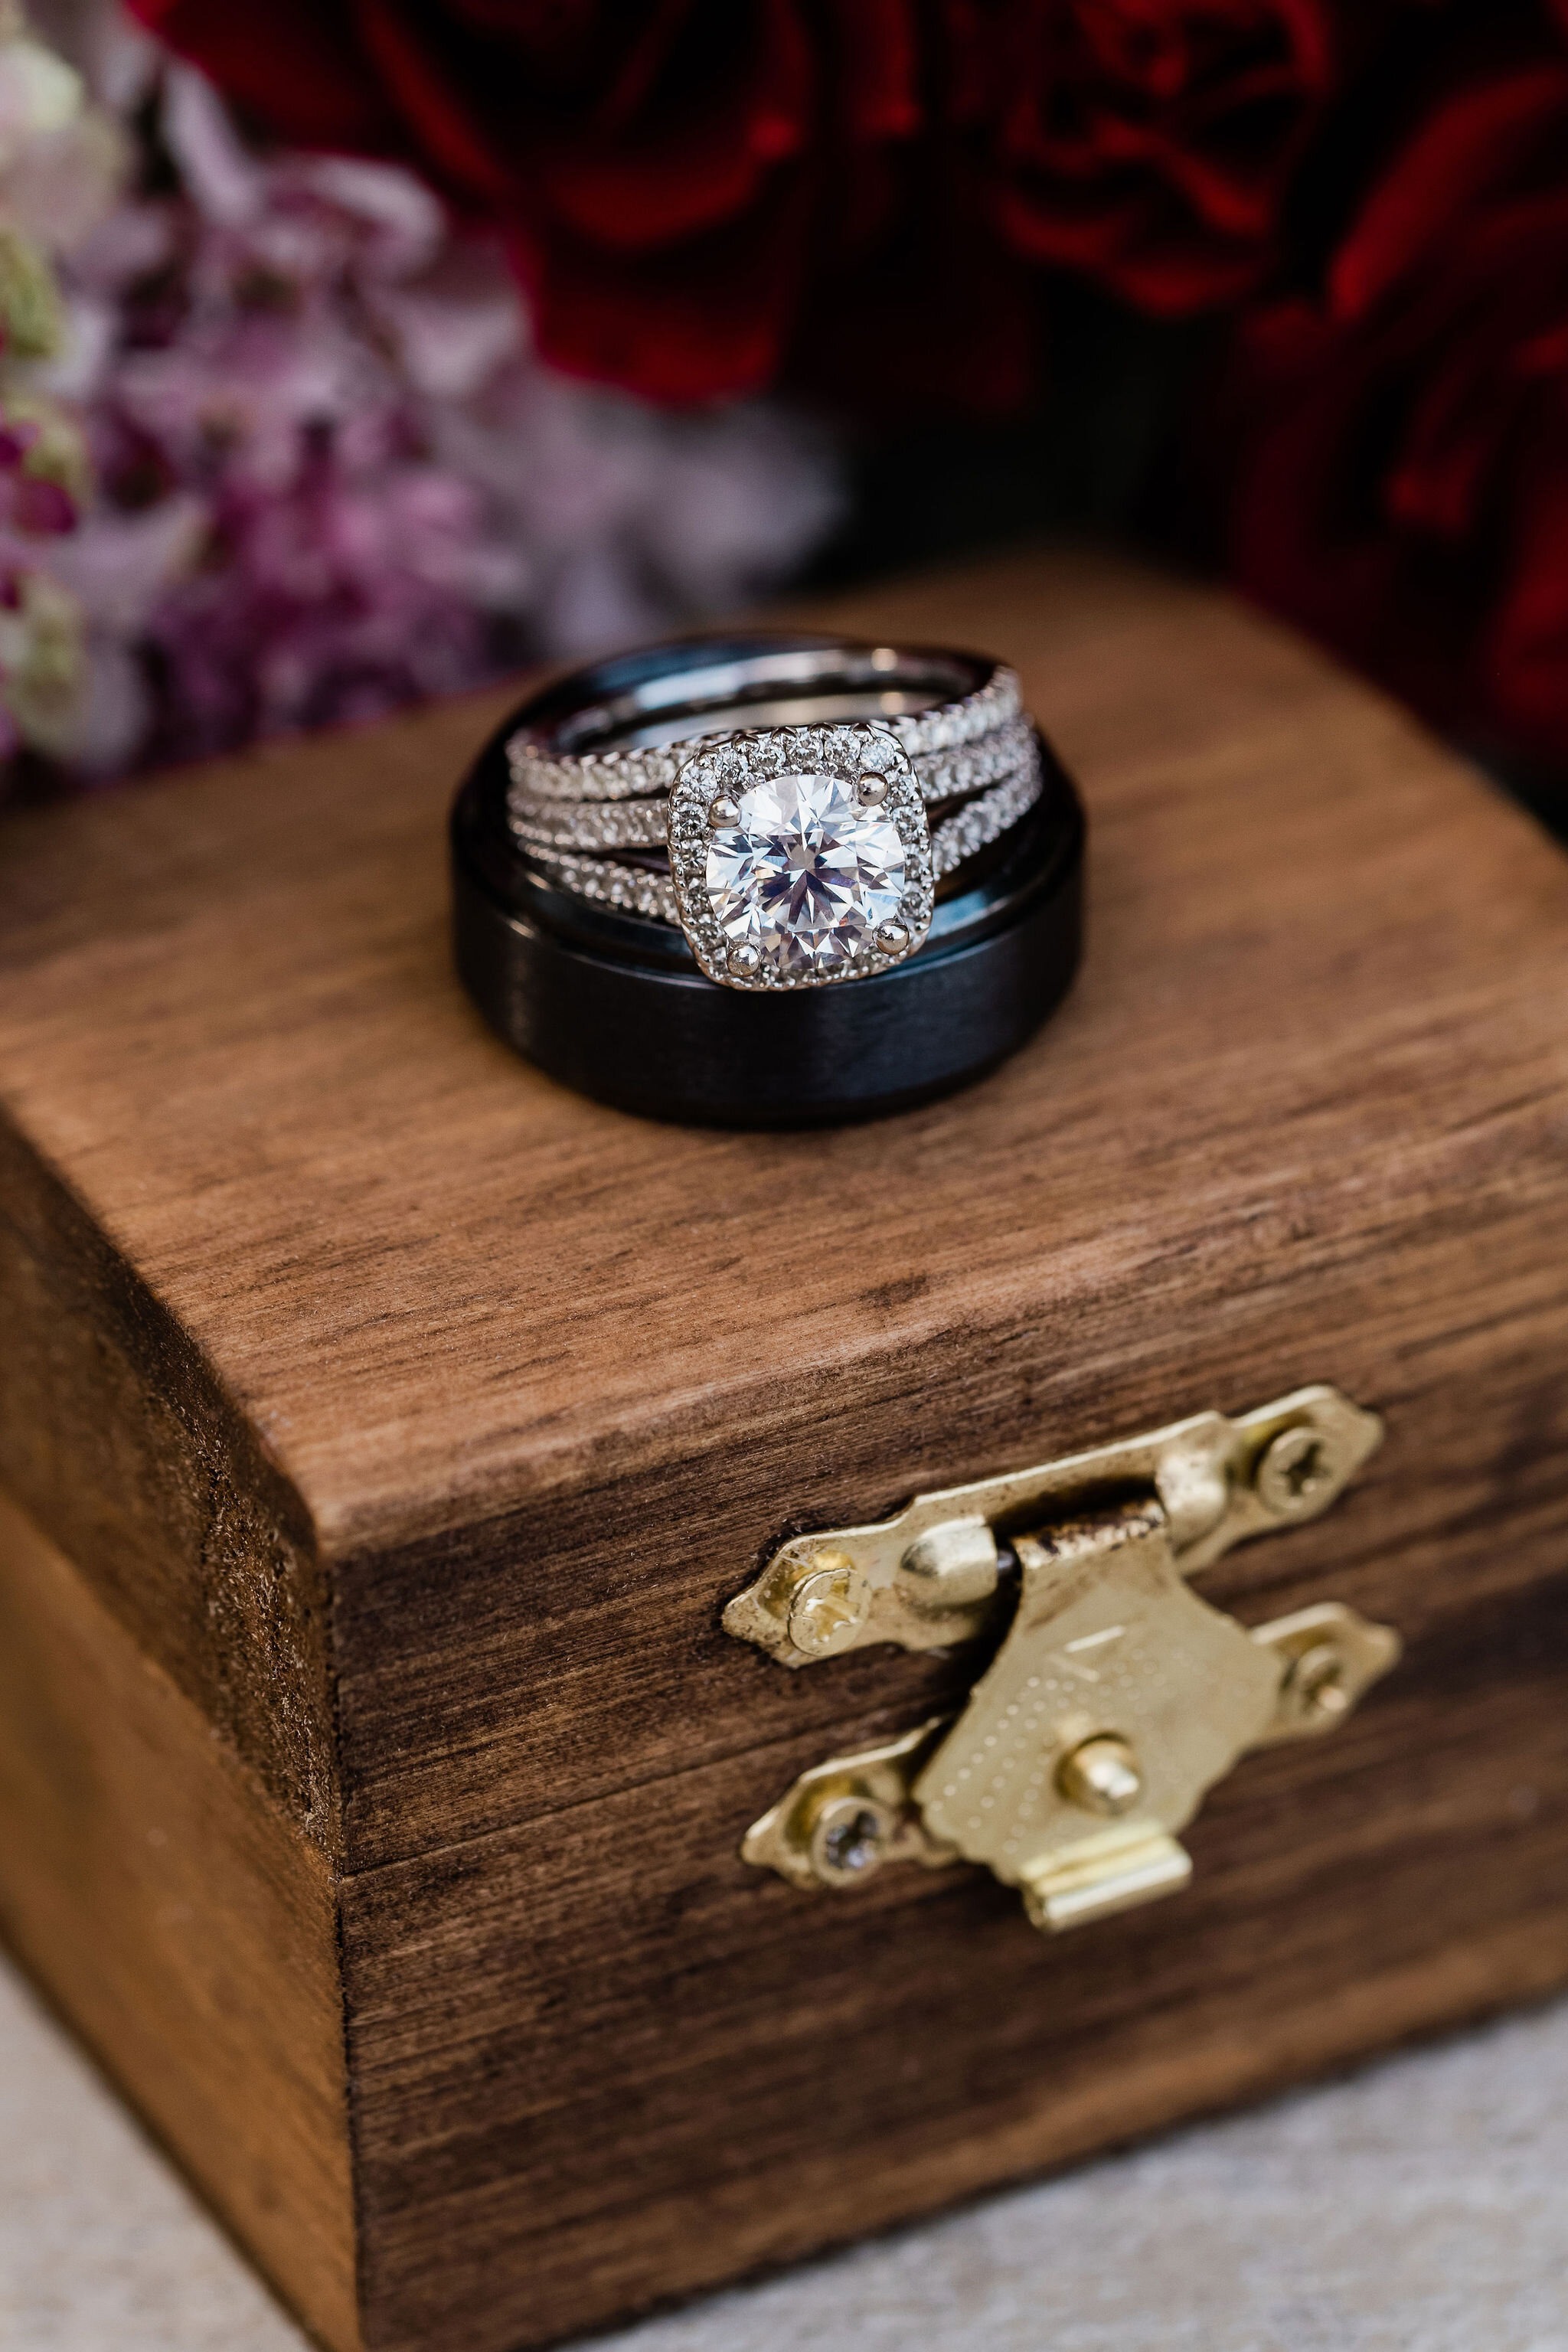 Wedding rings on a wooden ring box